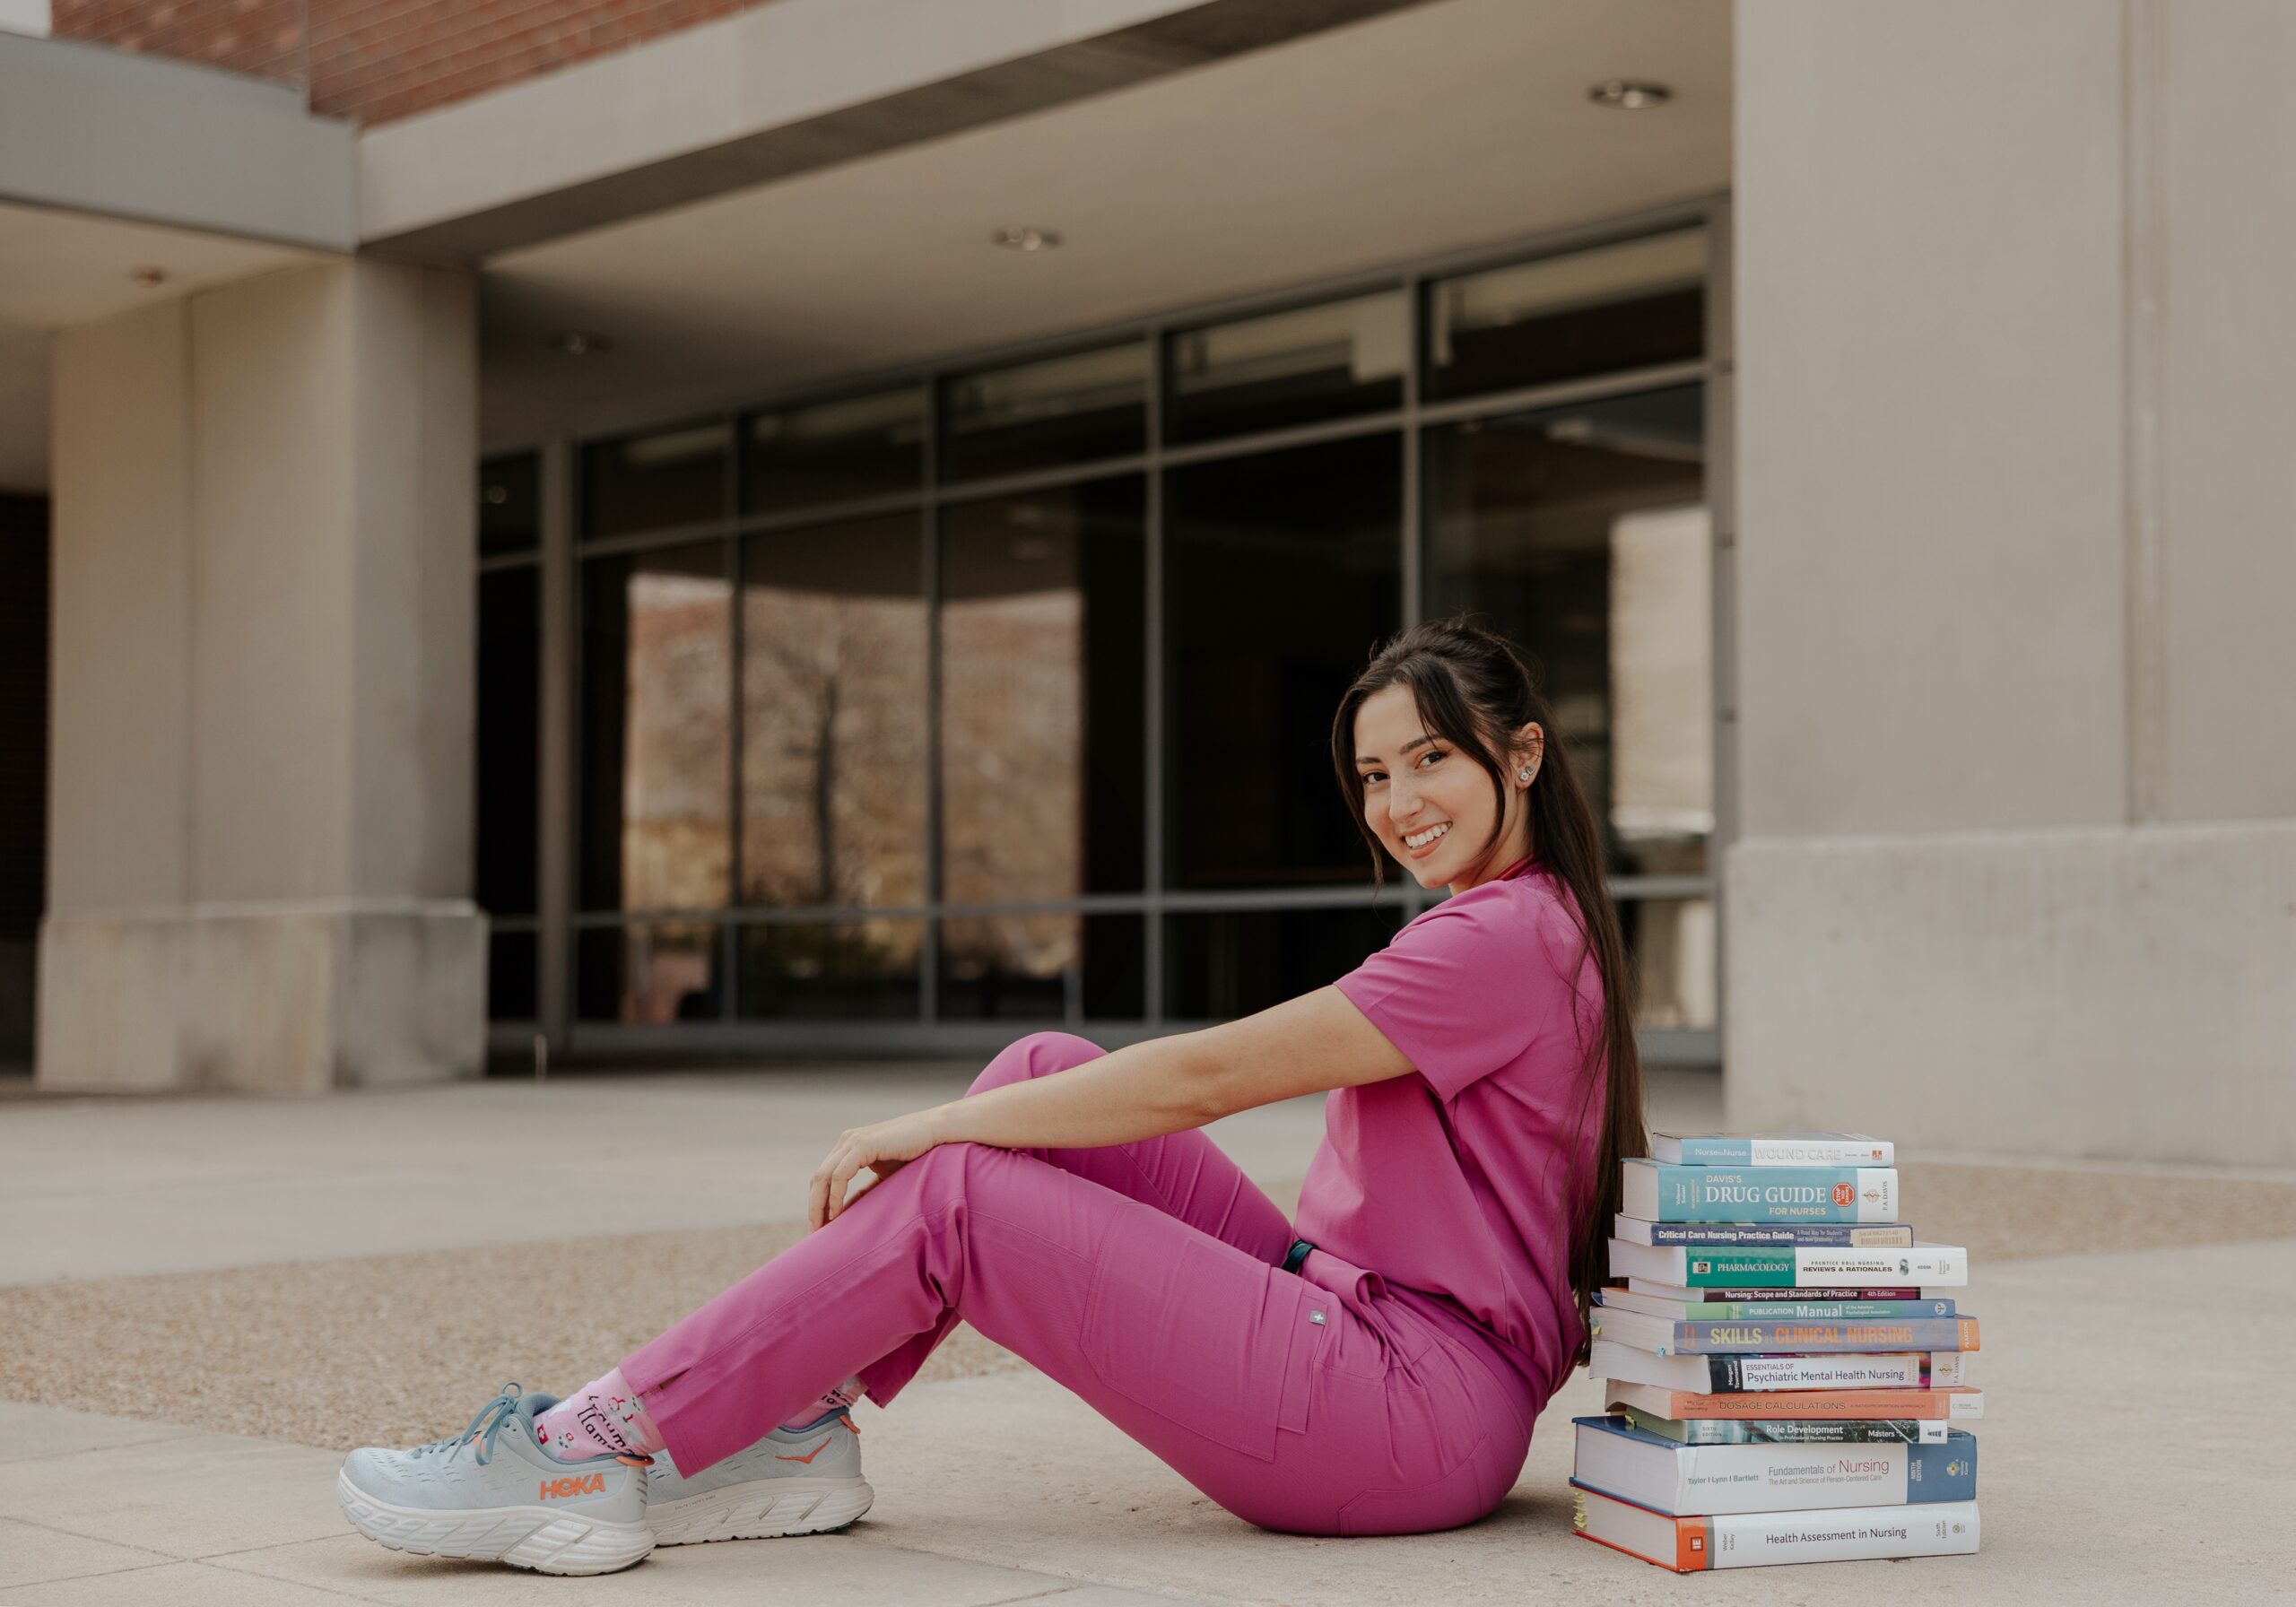 Nicolette Misbrenner poses on the app State campus with her textbooks